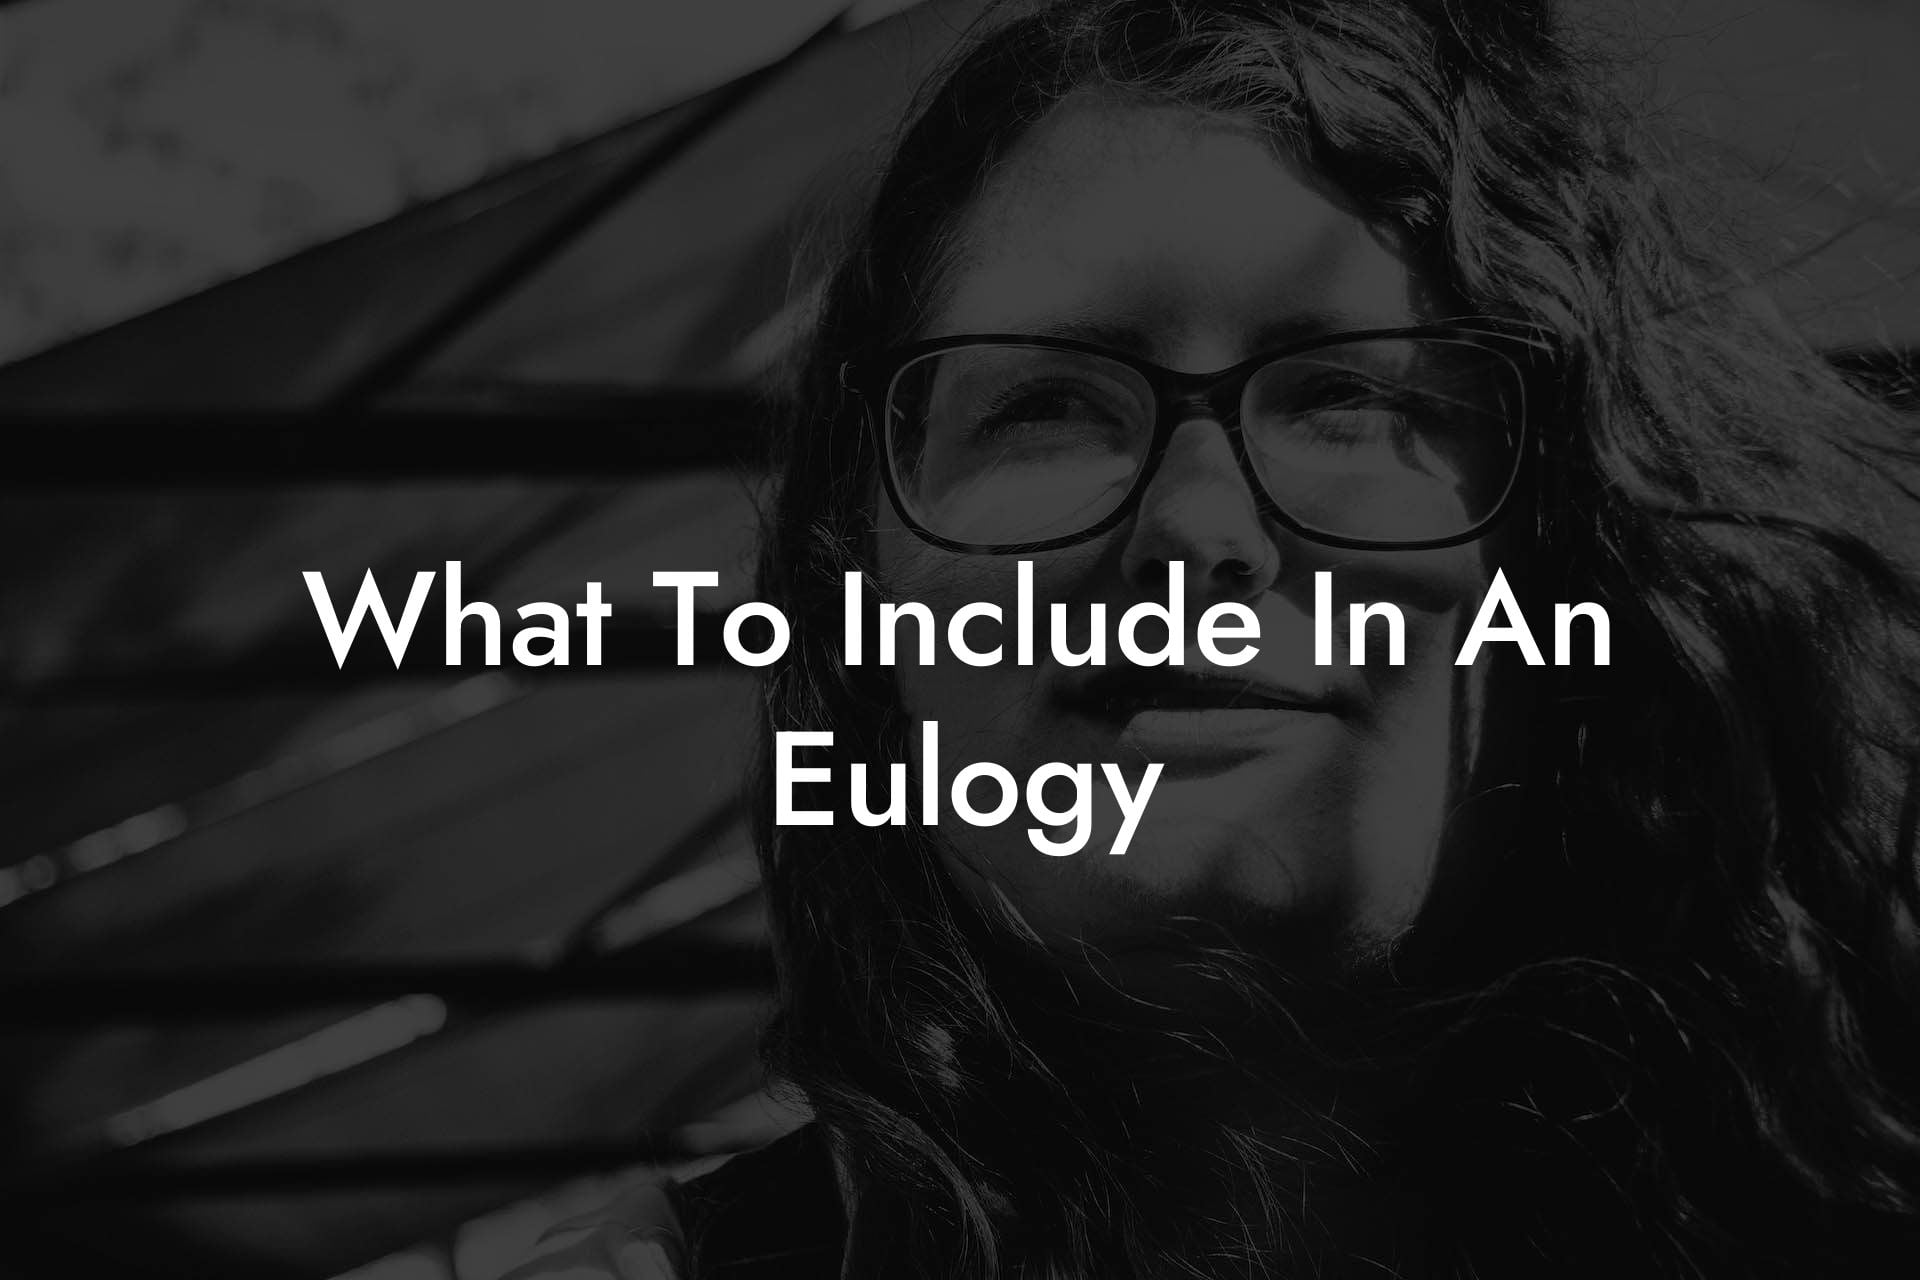 What To Include In An Eulogy